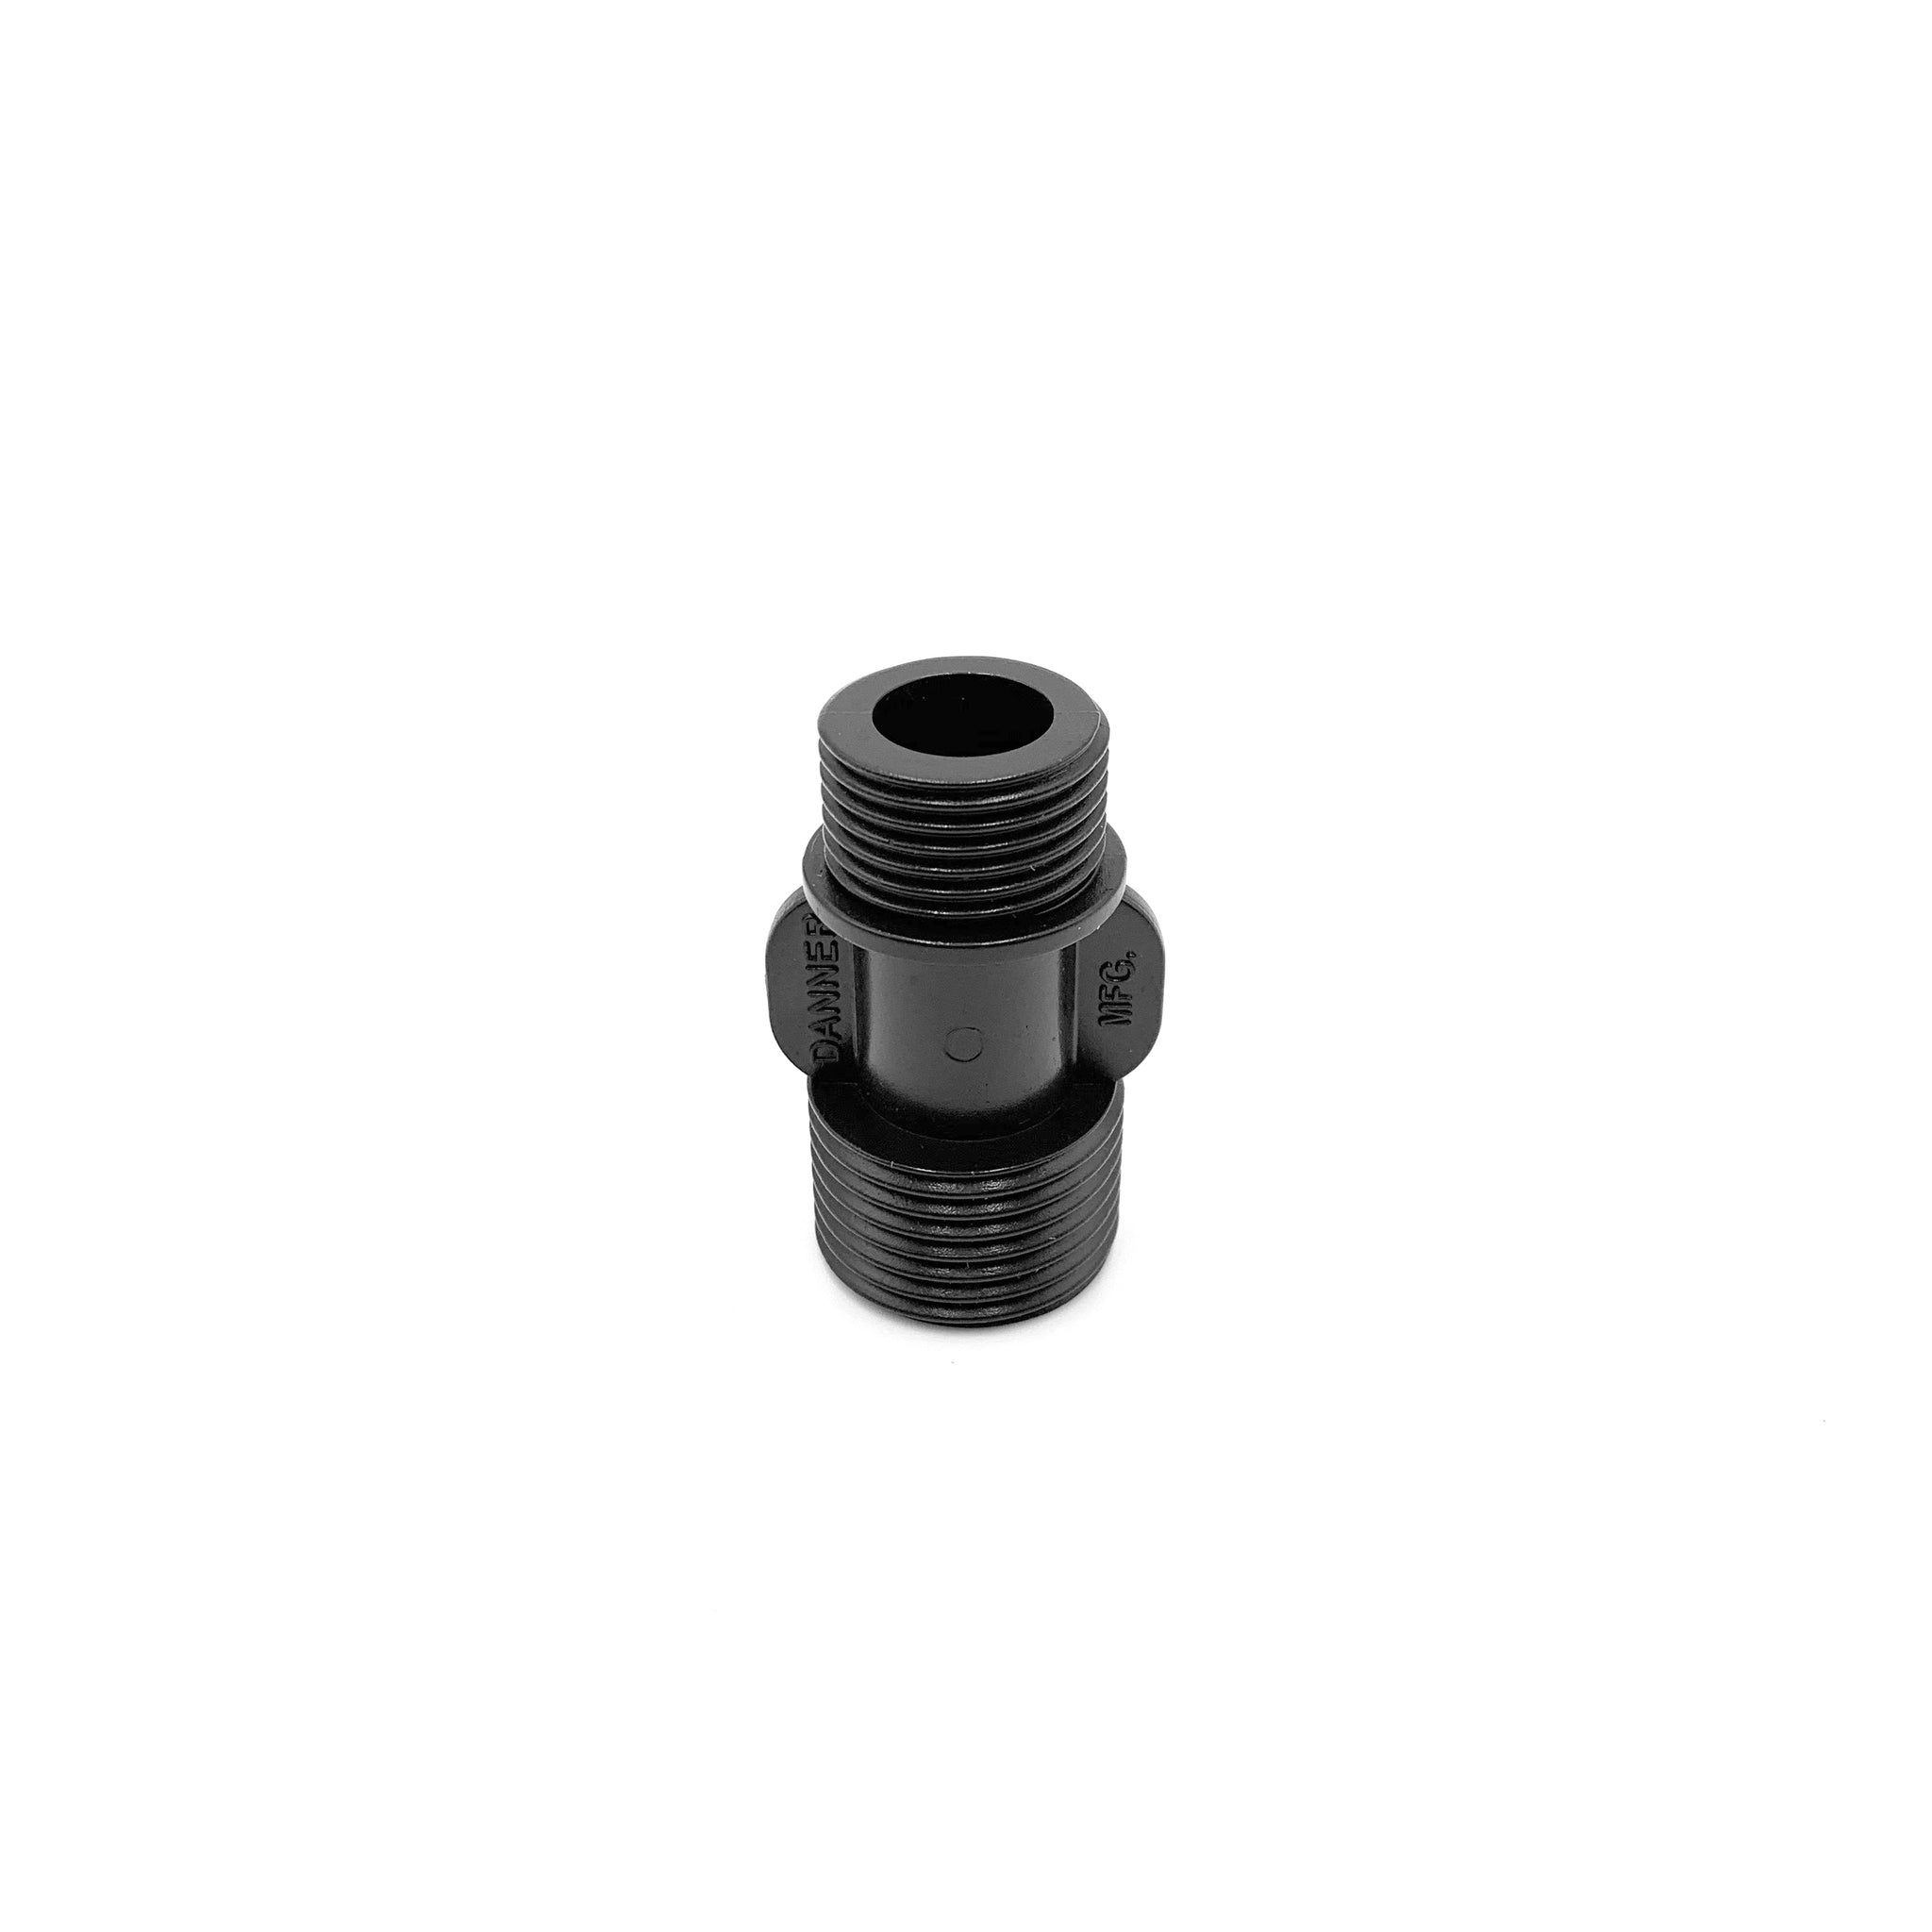 REPLACEMENT 3/4" GHT HOSE FITTING FOR COVER-CARE AUTO 360 POOL COVER PUMP